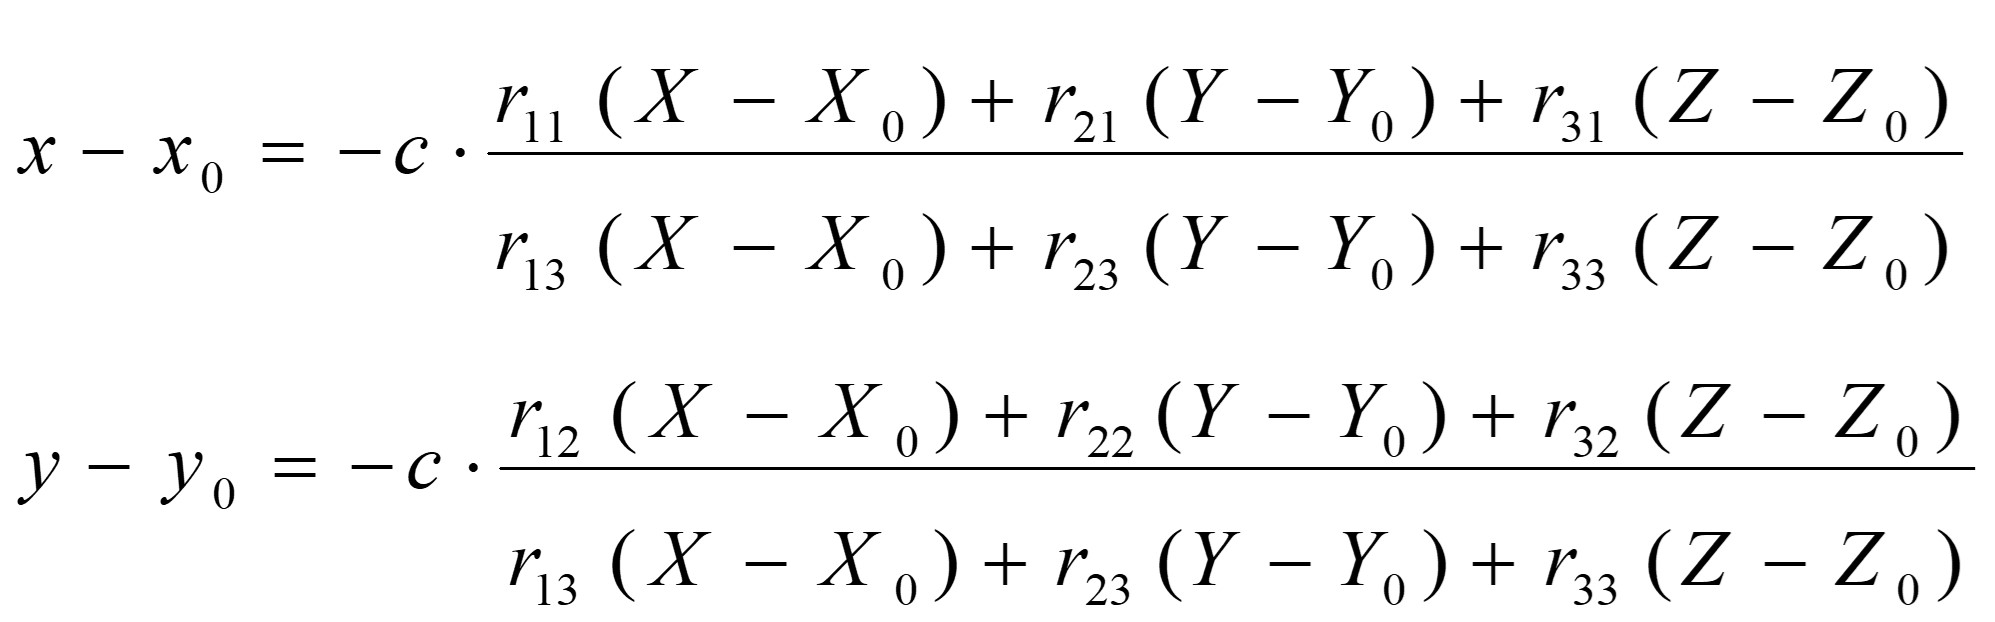 Collinearity equations